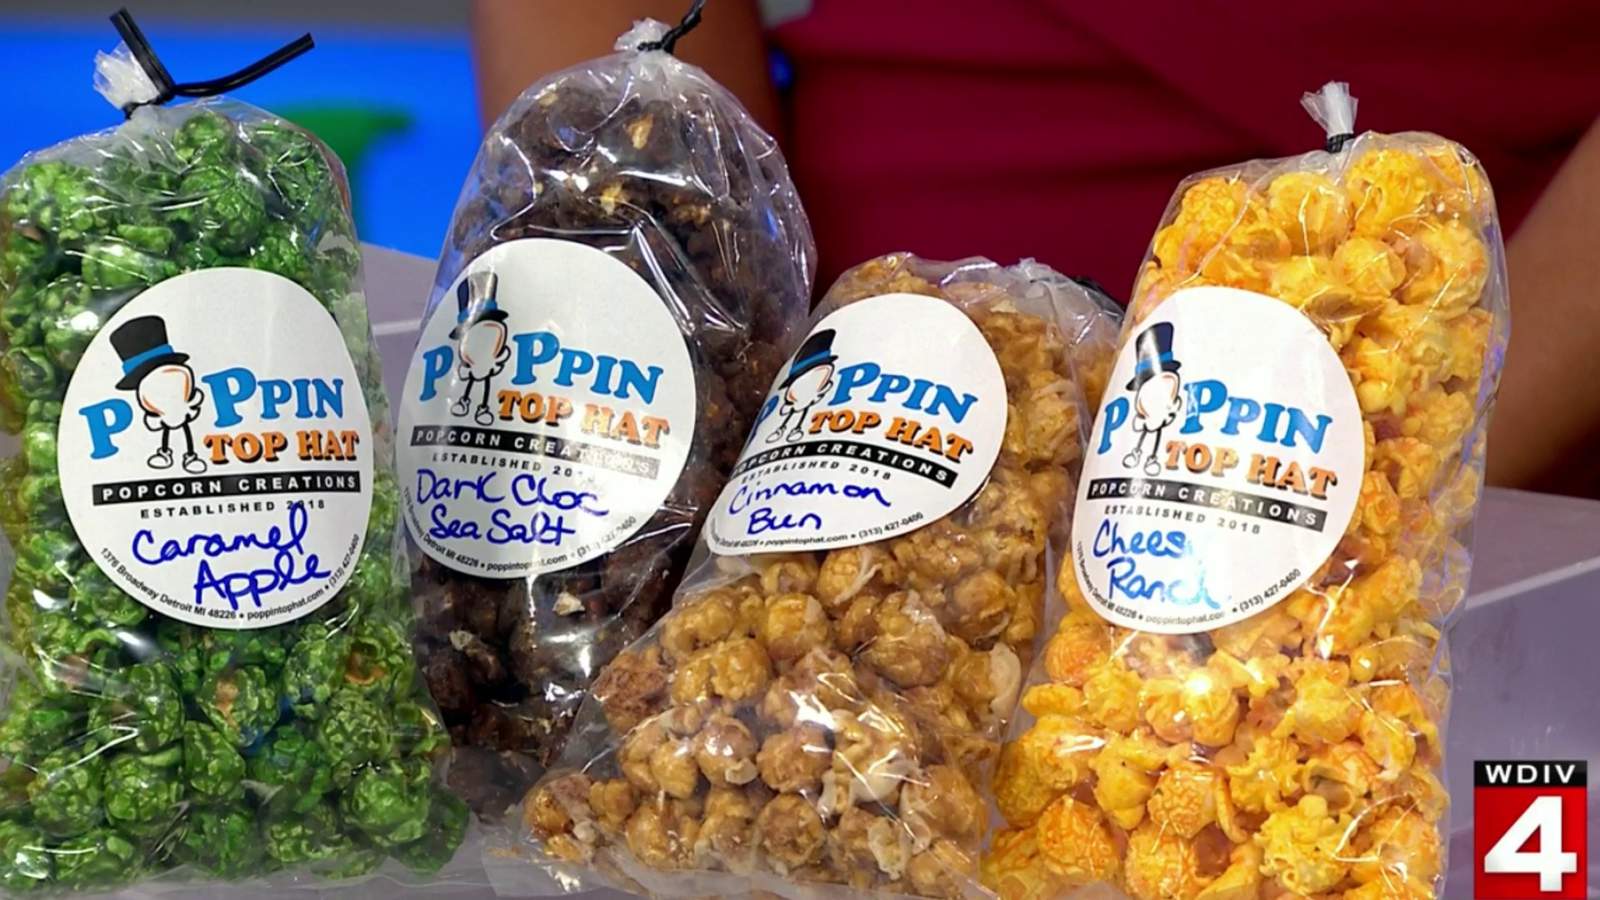 Tasty Tuesday: Poppin Top Hat Popcorn Creations